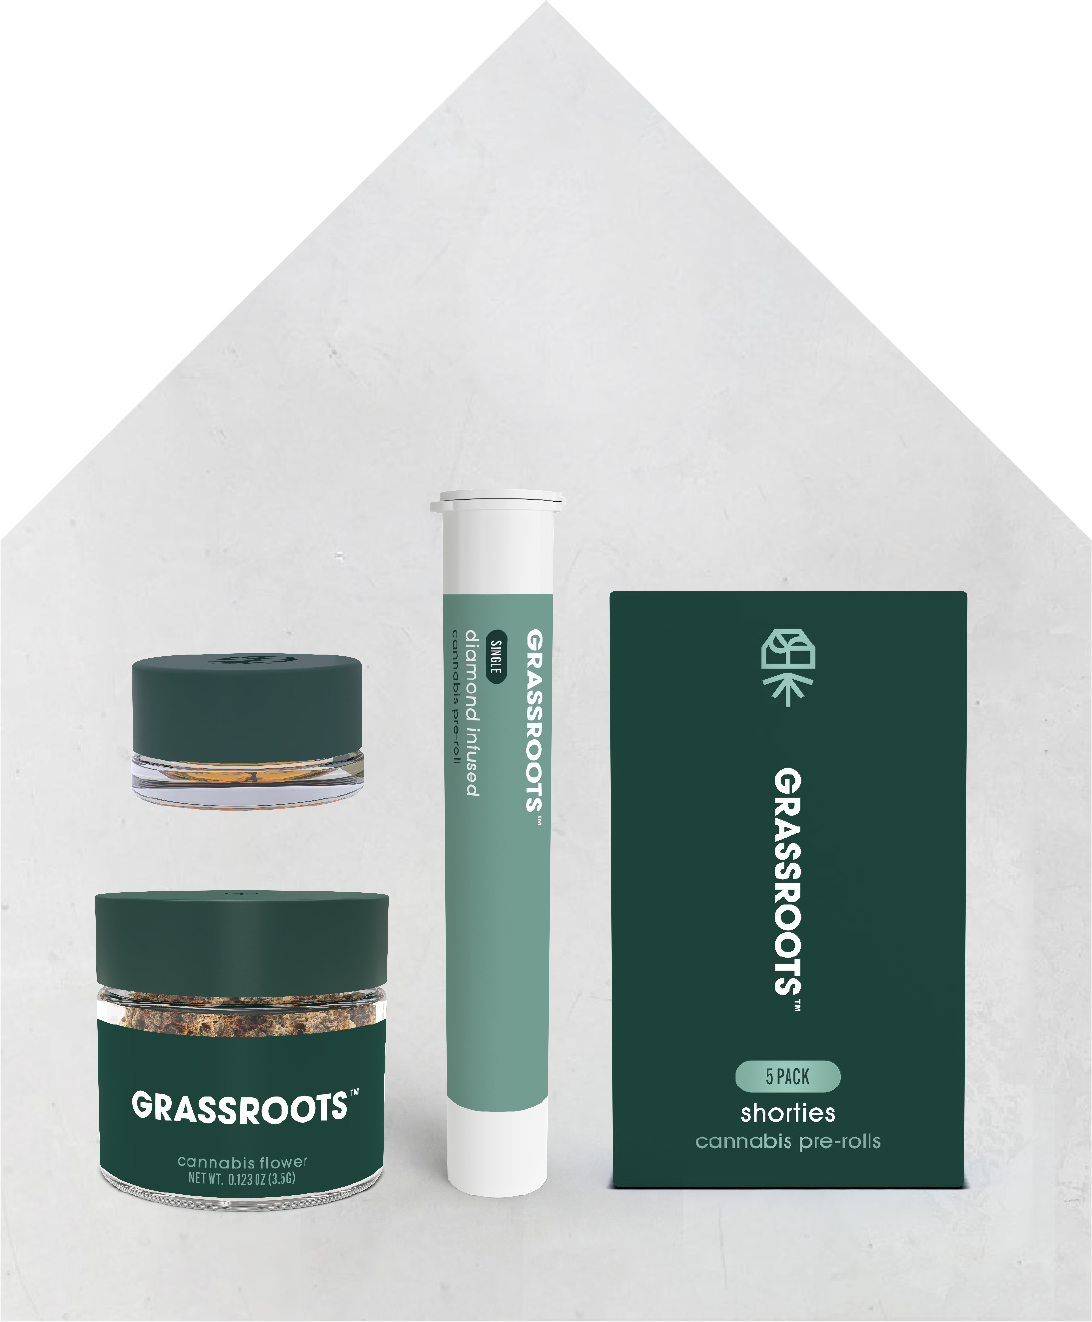 Grassroots products